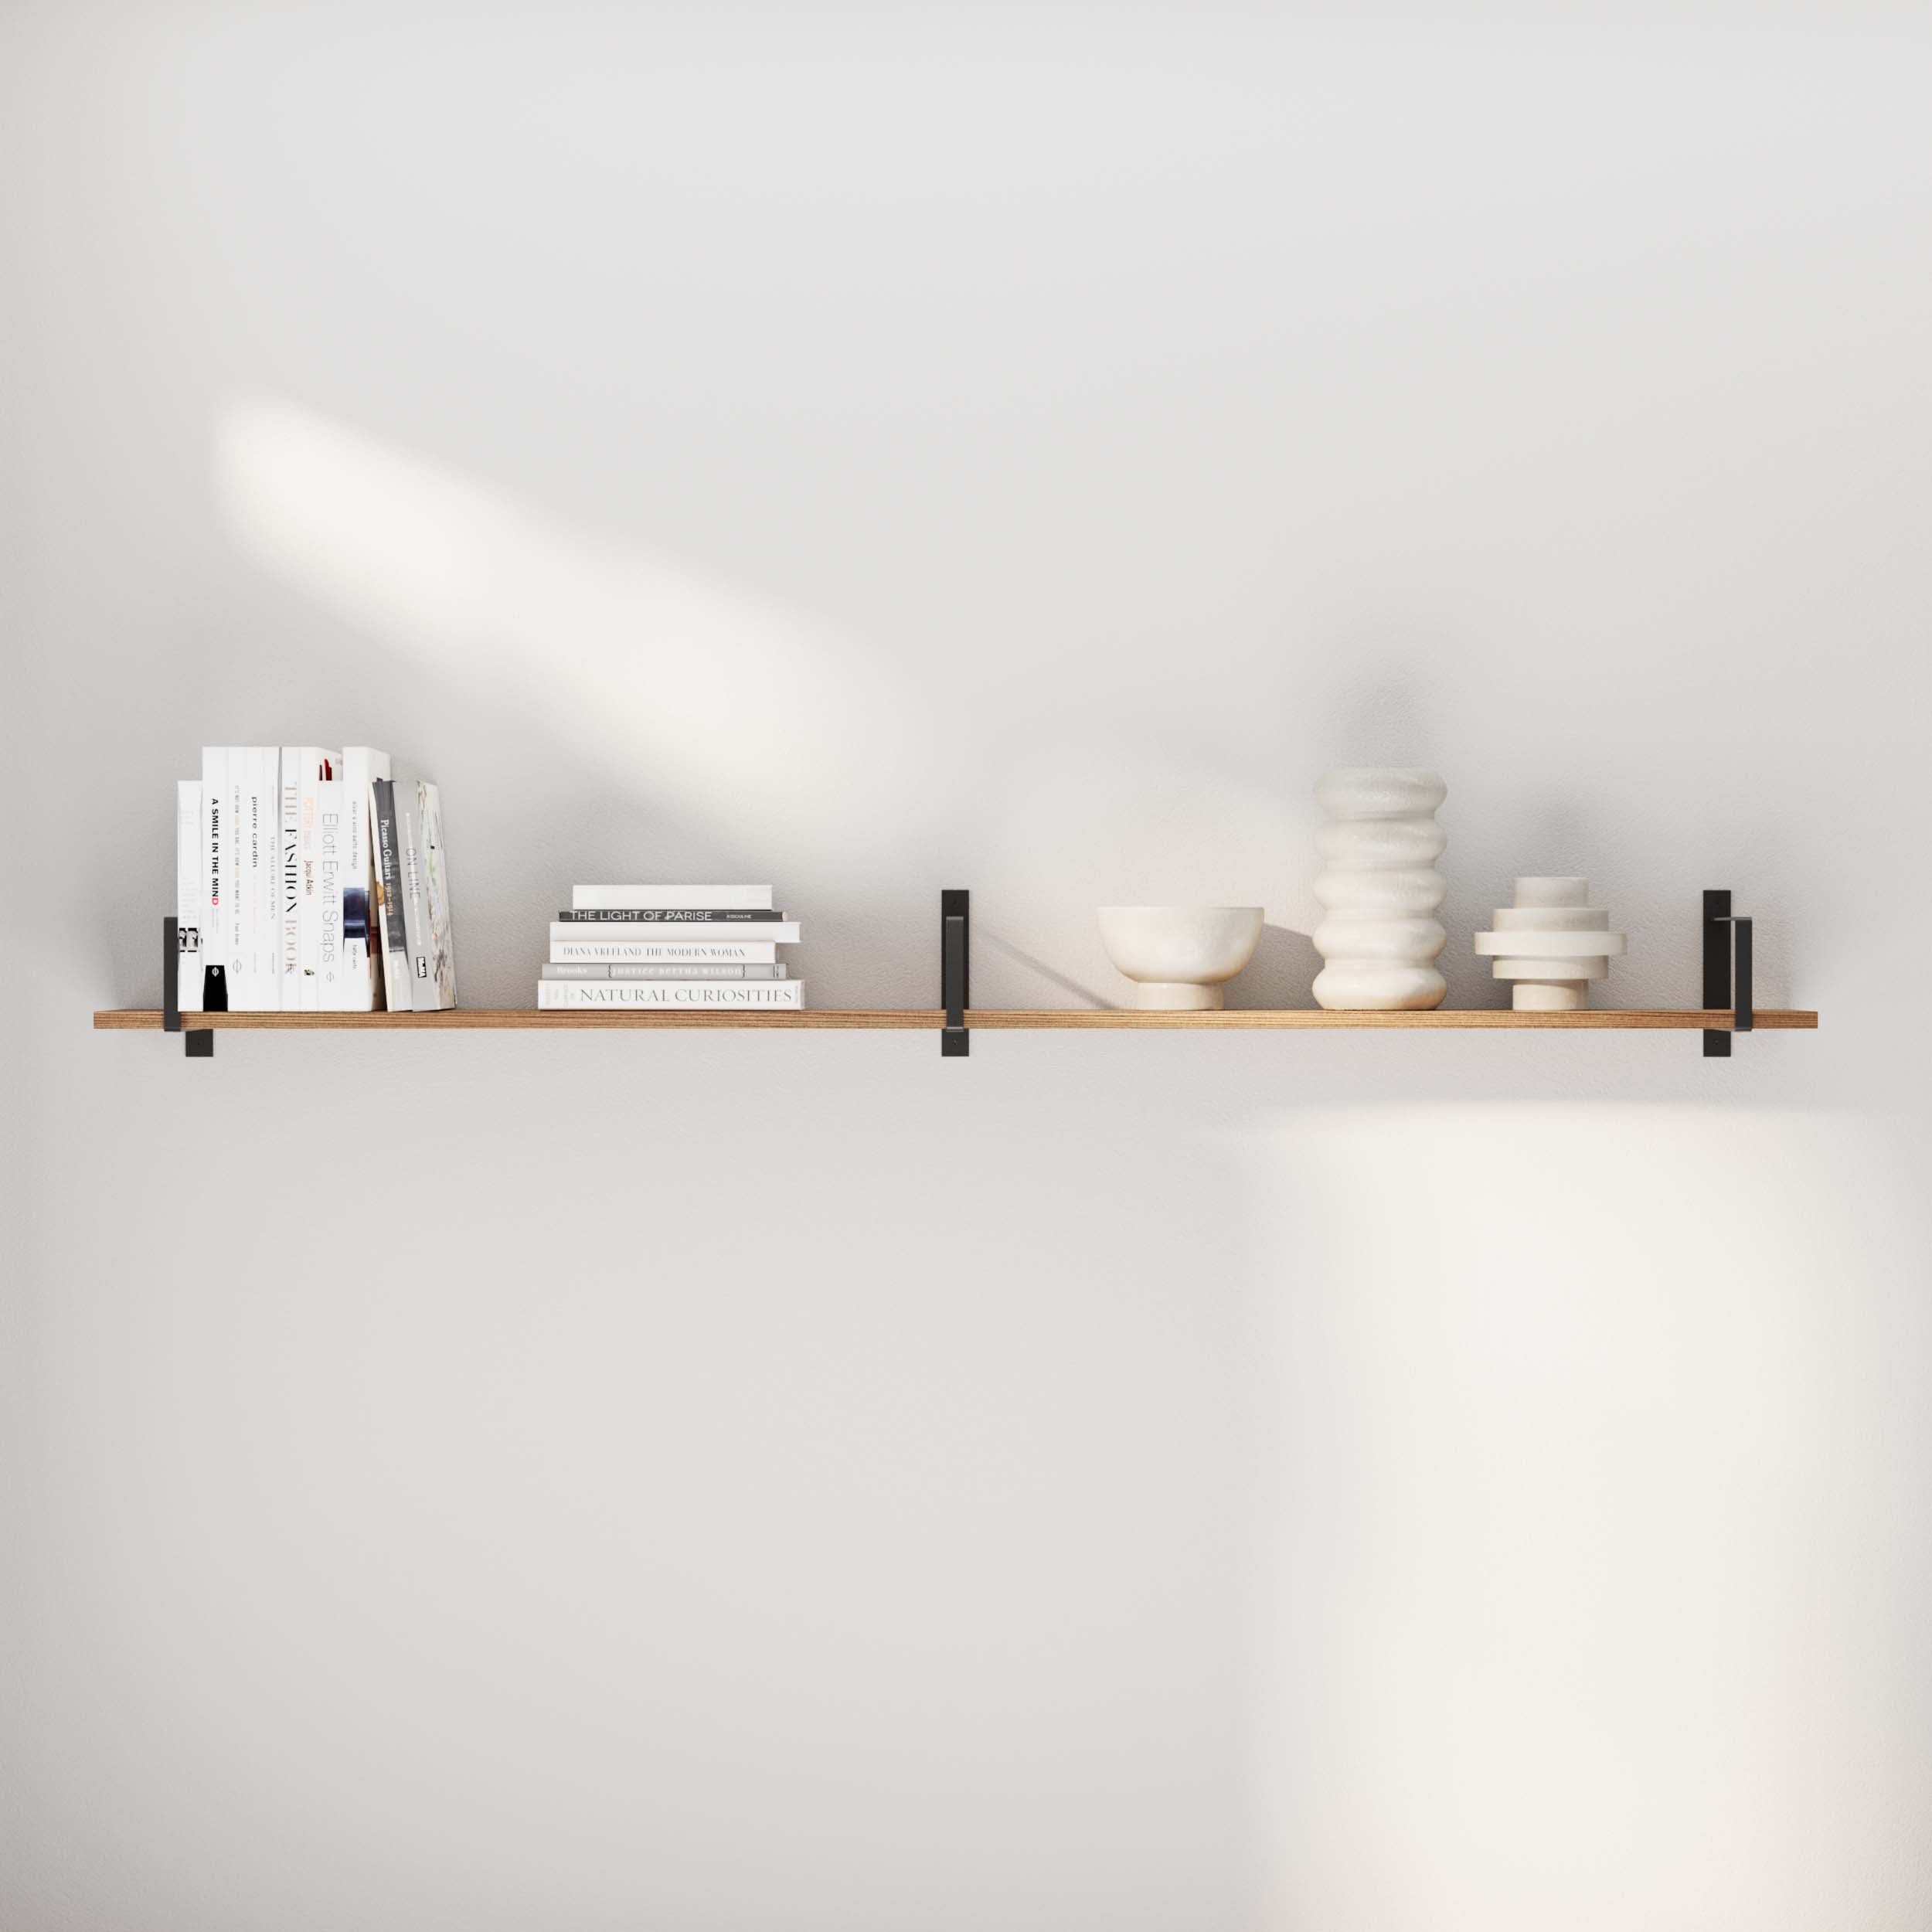 Book shelf for wall with books and modern art pieces, highlighting light and space usage.